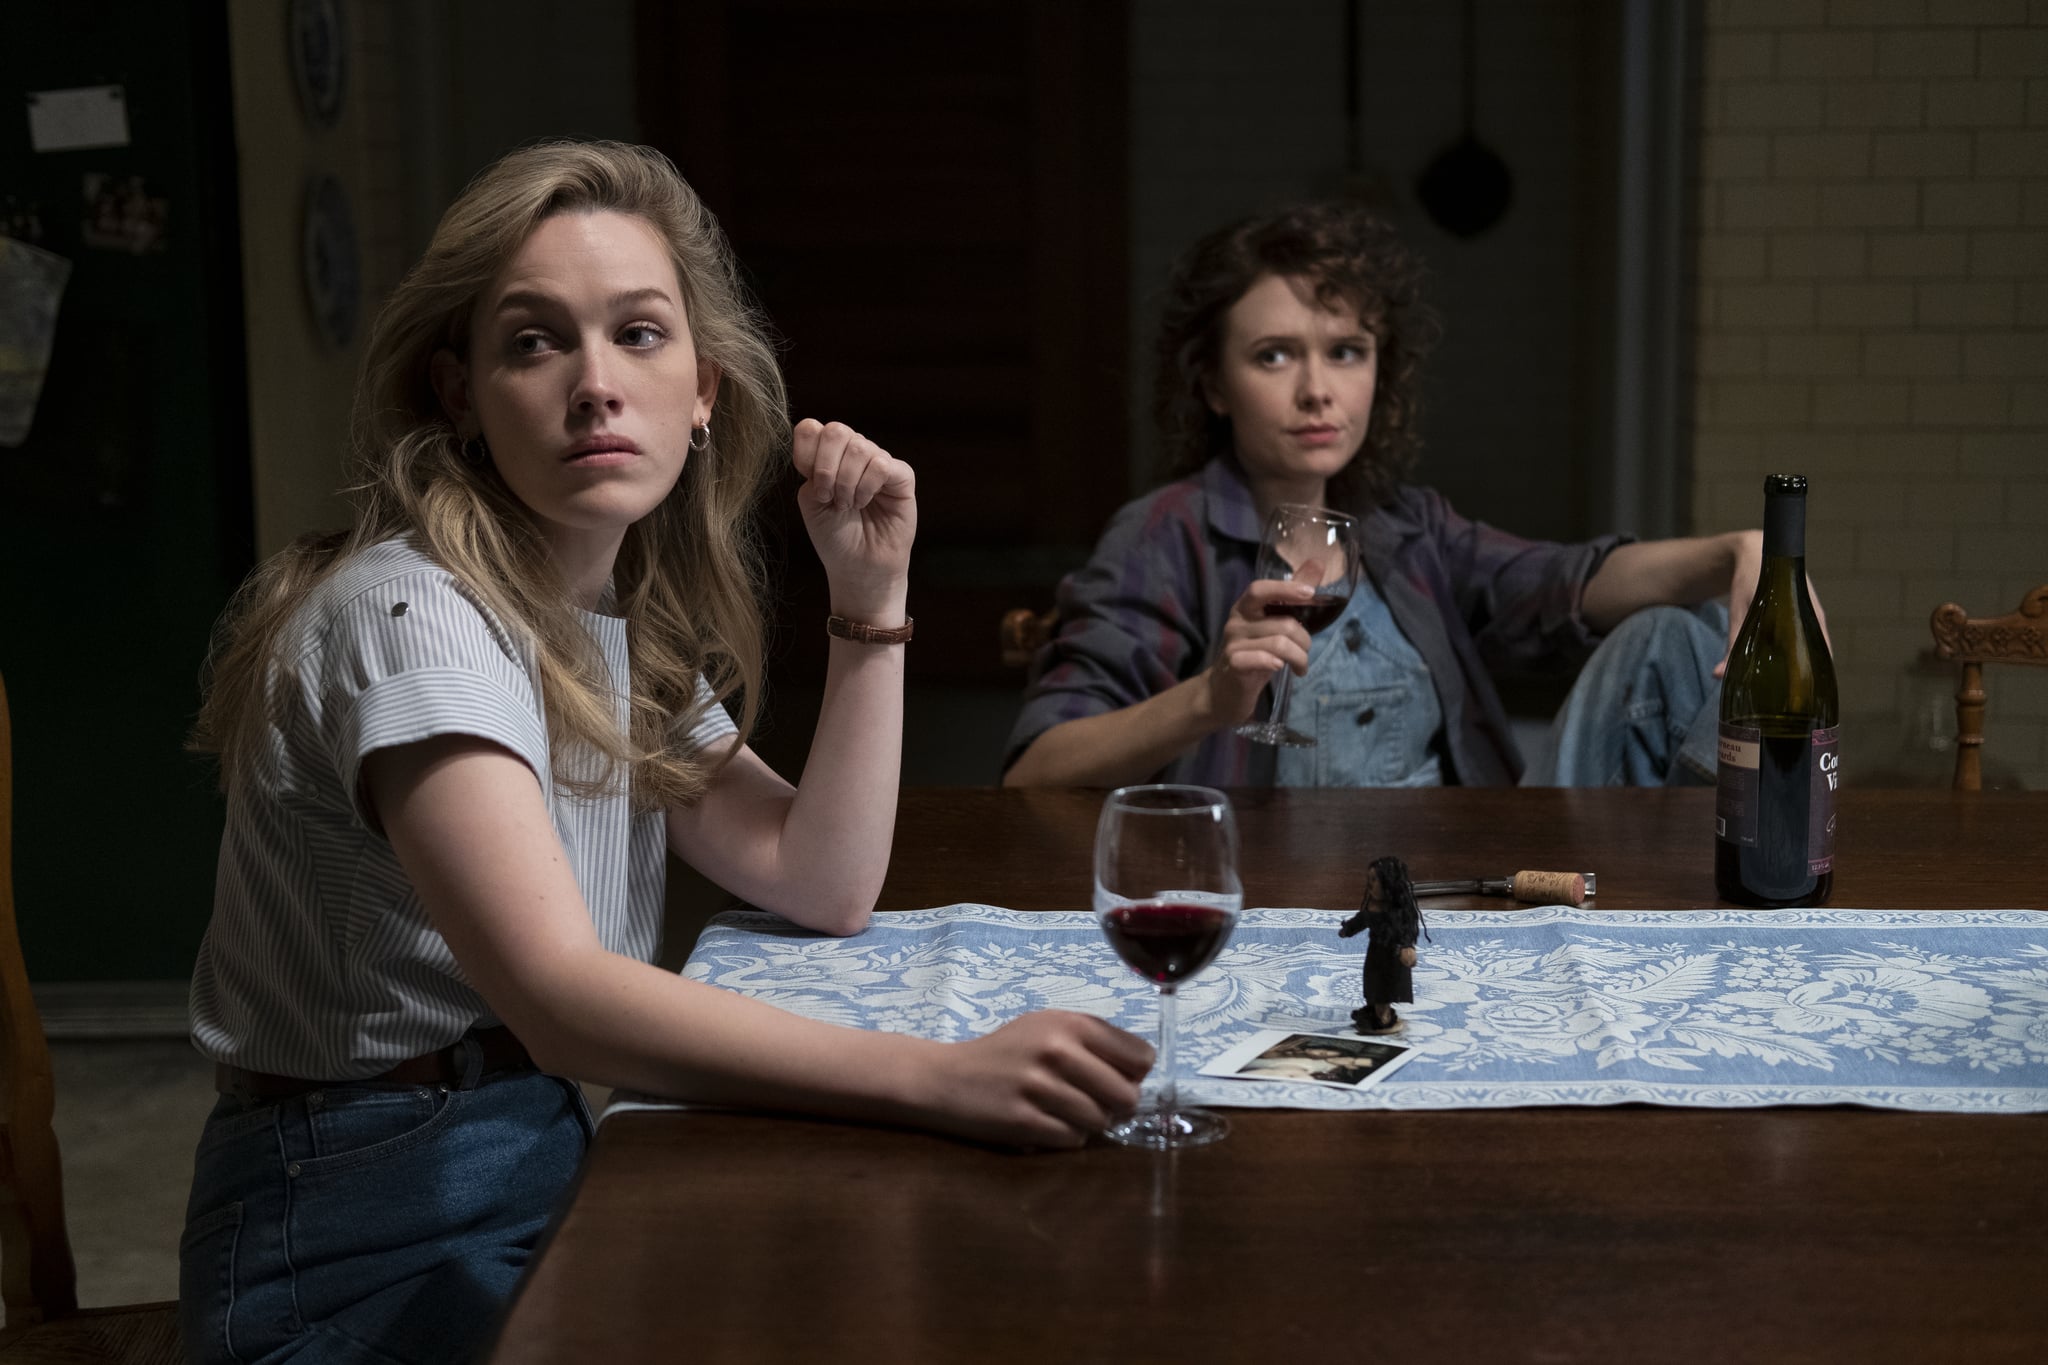 THE HAUNTING OF BLY MANOR (L to R) VICTORIA PEDRETTI as DANI and AMELIA EVE as JAMIE in episode 103 of THE HAUNTING OF BLY MANOR Cr. EIKE SCHROTER/NETFLIX  2020